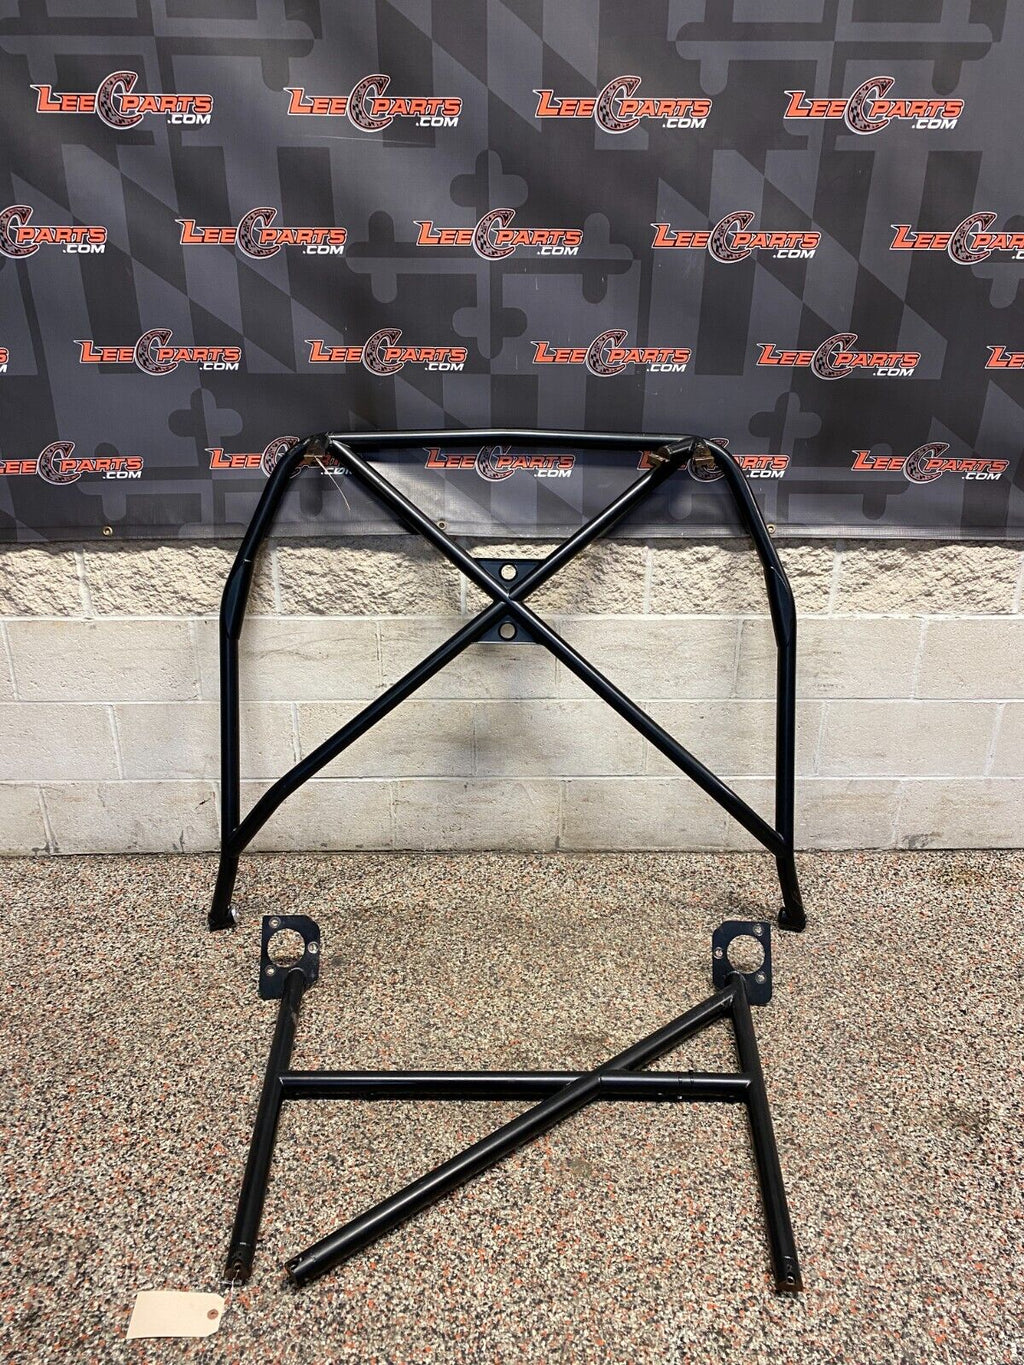 2007 PORSCHE 911 TURBO 997 GMG RSR ROLL BAR CAGE BLACK WITH HARDWARE USED